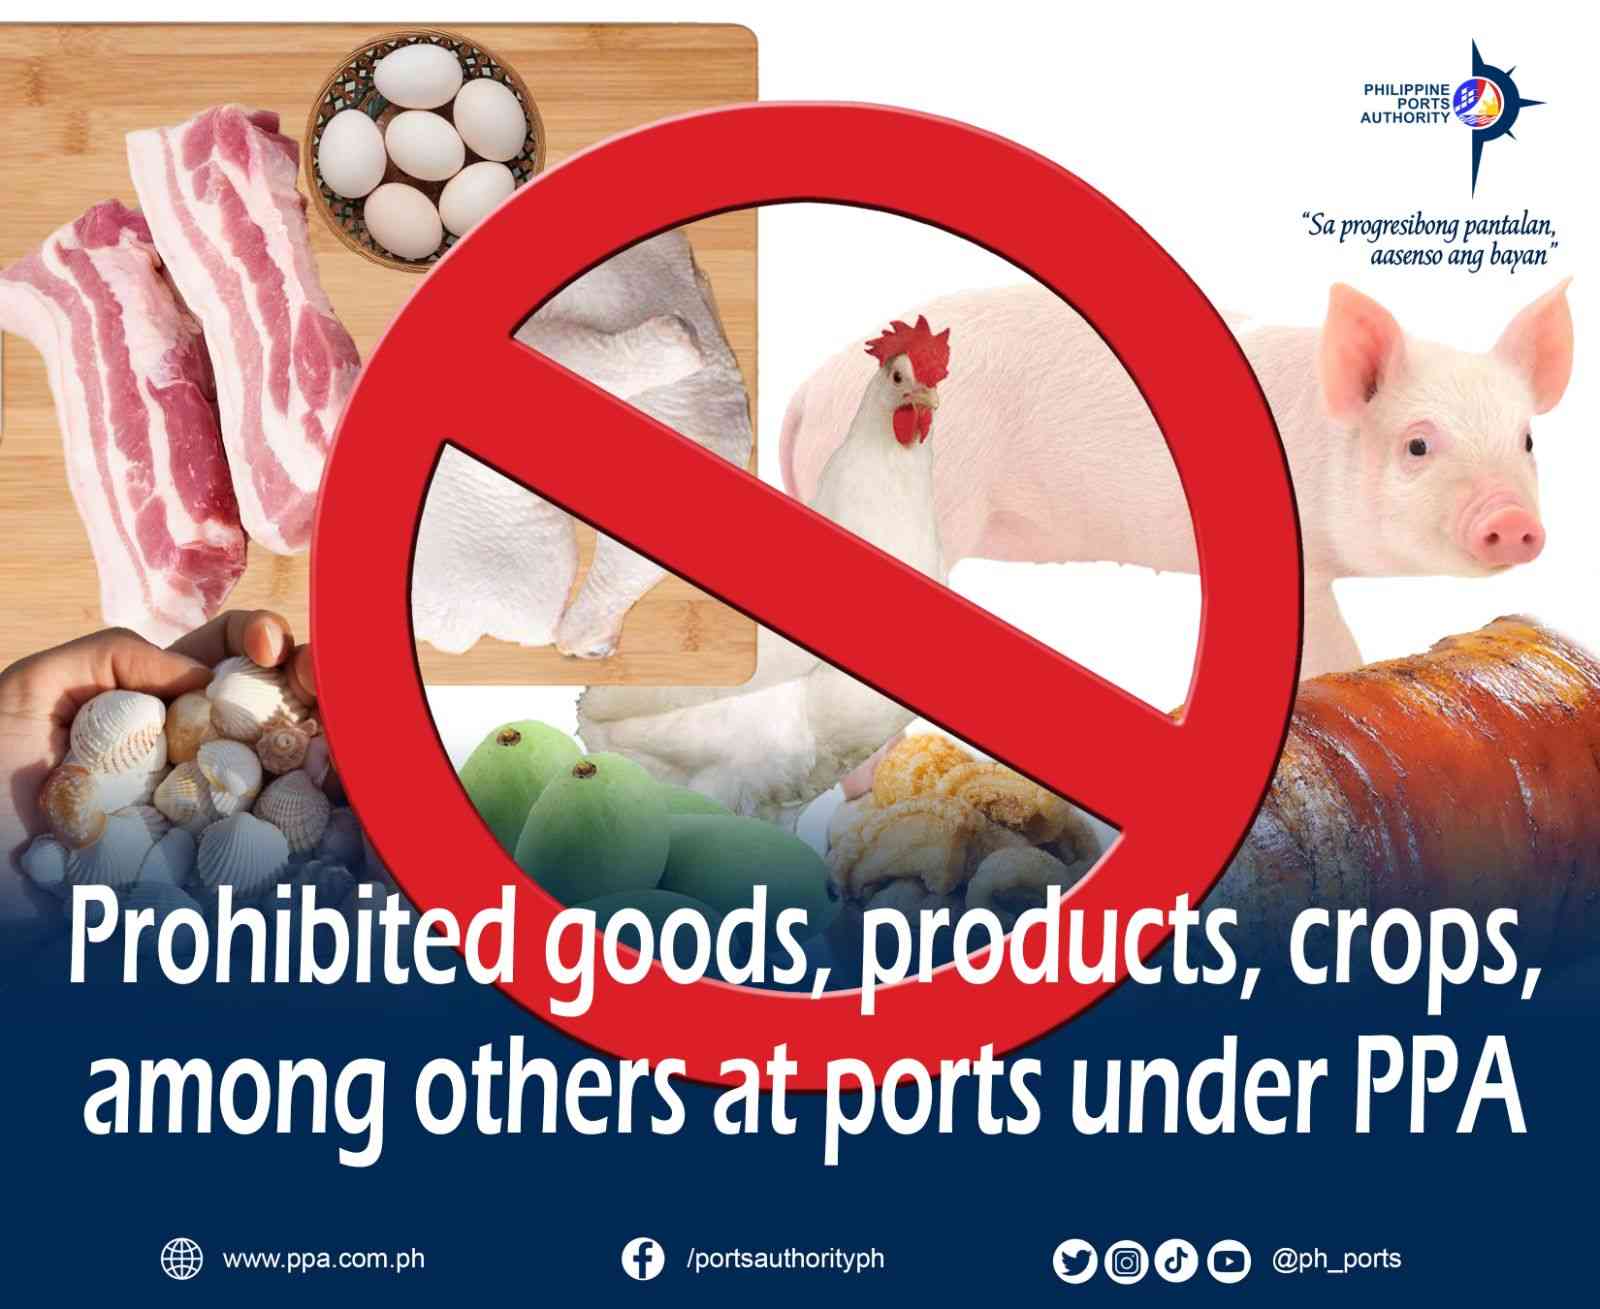 PPA reminds public: Pork, chicken meats are not allowed